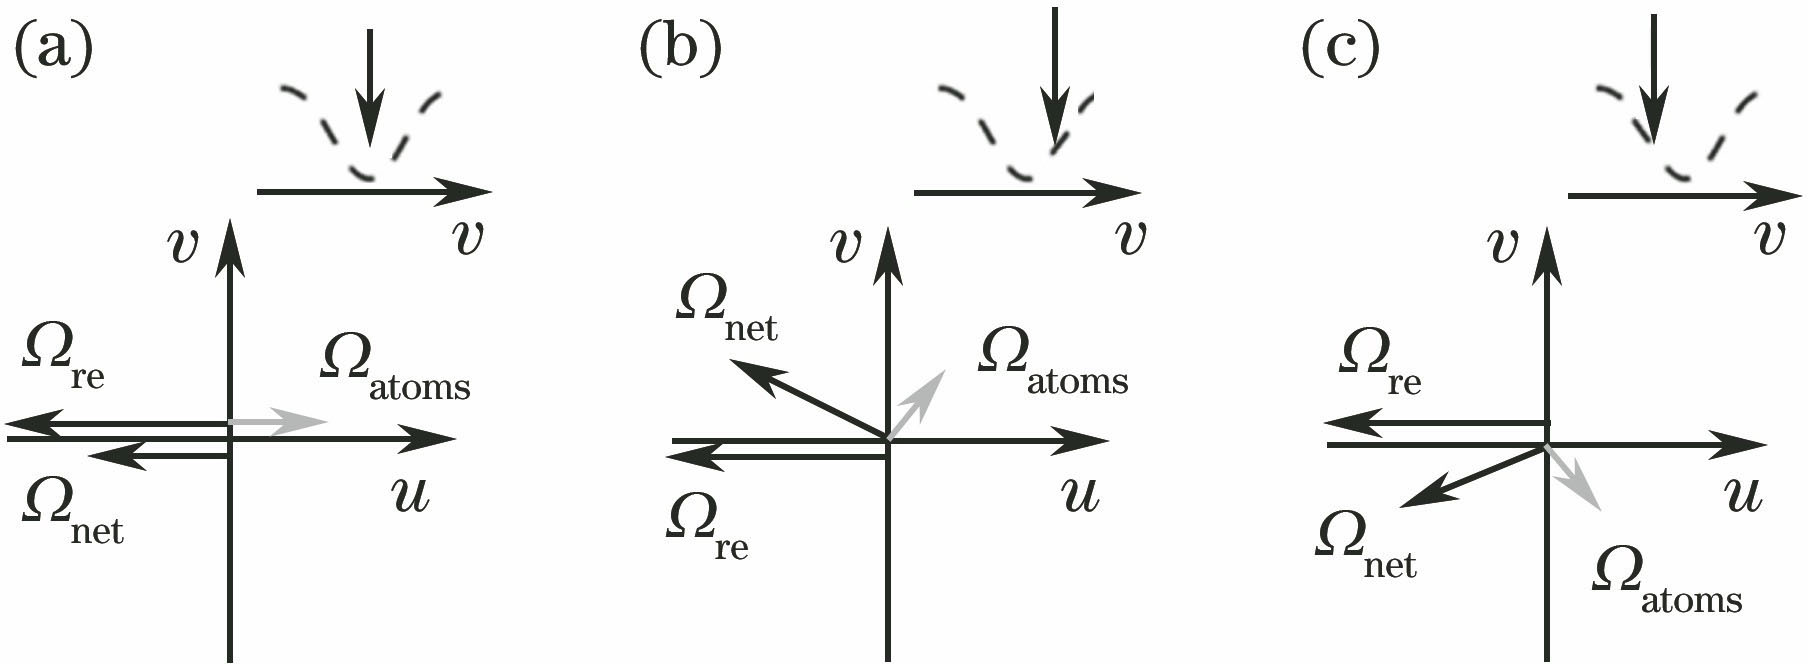 Diagram of interaction between incident laser and spectral hole-burning. (a) Laser frequency equal to central frequency of spectral hole-burning; (b) laser frequency higher than central frequency of spectral hole-burning; (c) laser frequency lower than central frequency of spectral hole-burning